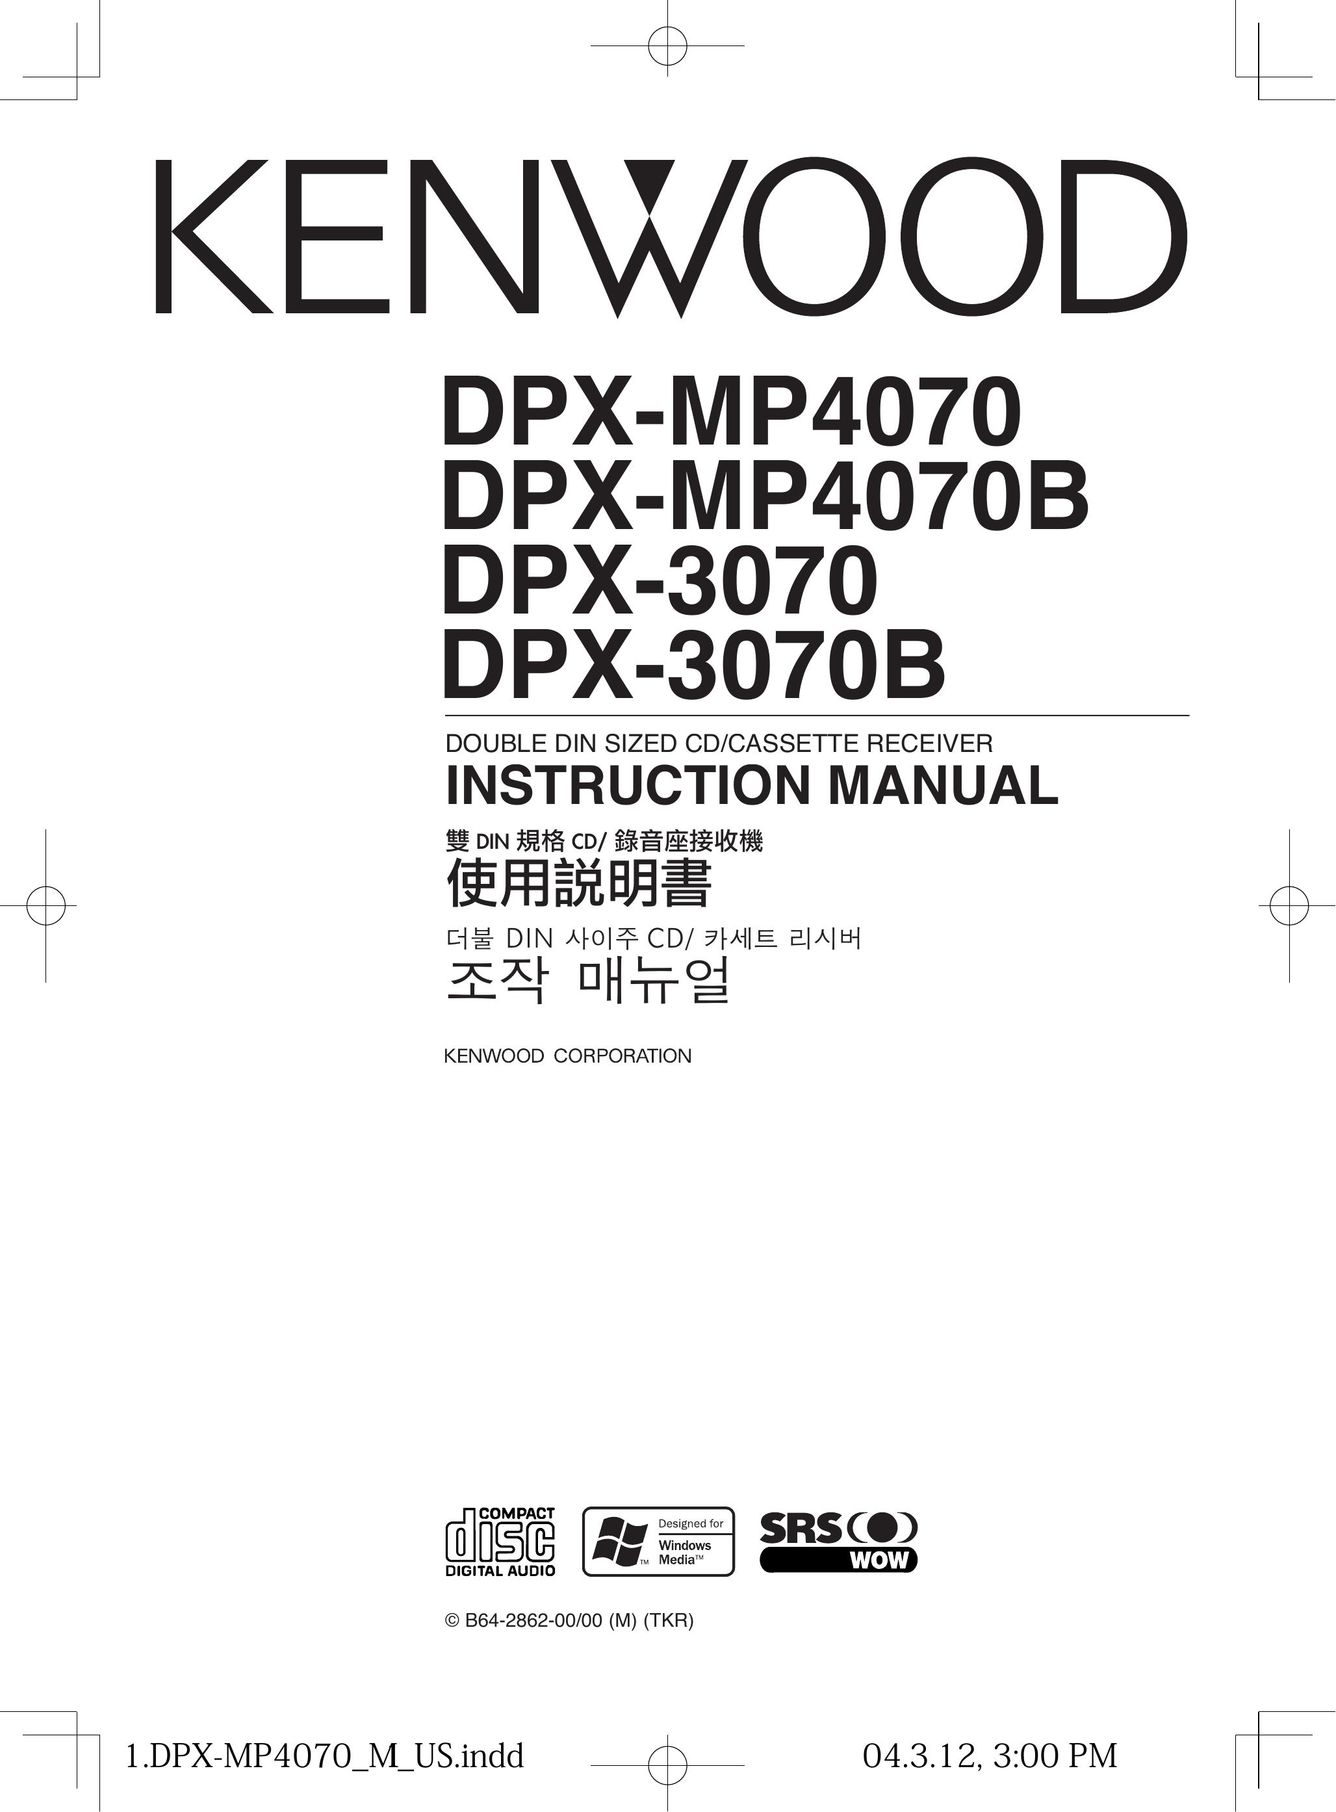 Kenwood DPX-3070B Car Stereo System User Manual